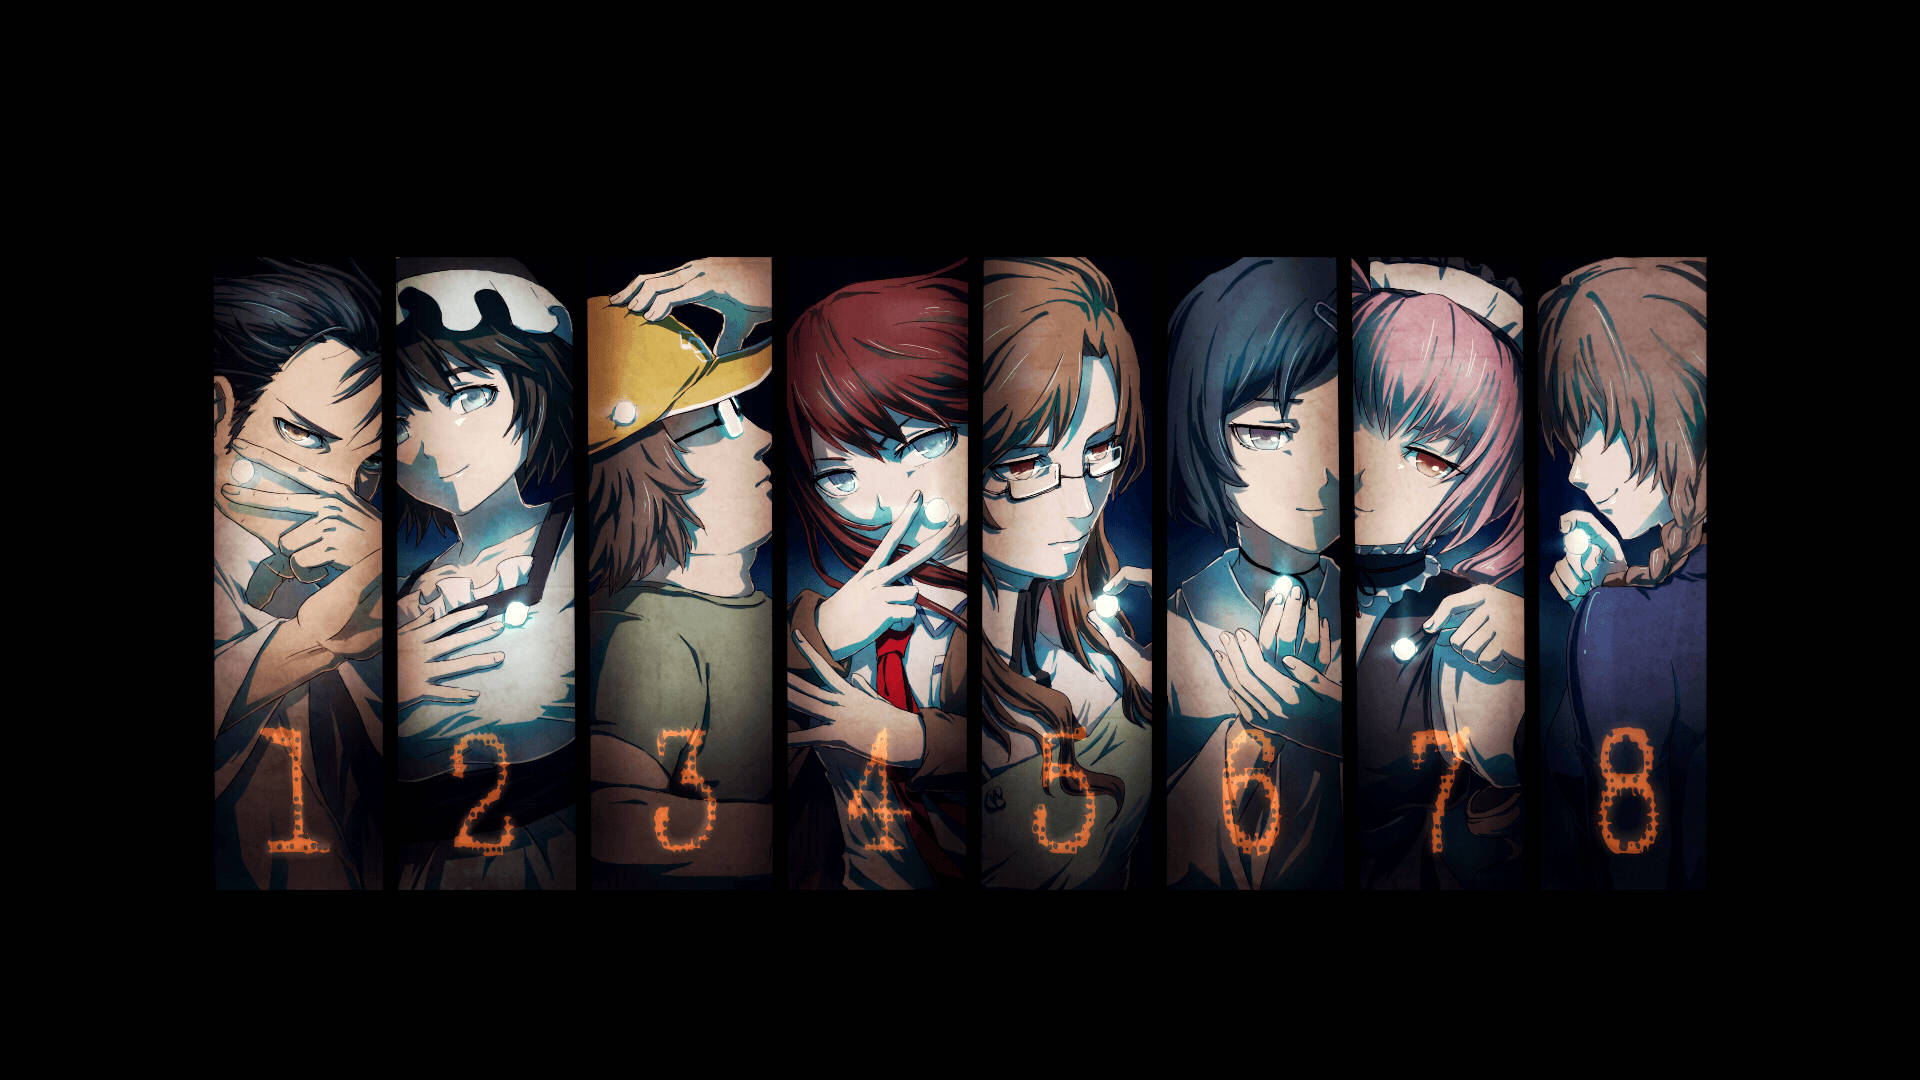 Enjoy the awe-inspiring journey of the realistic yet imaginative themes and characters in Steins Gate. Wallpaper